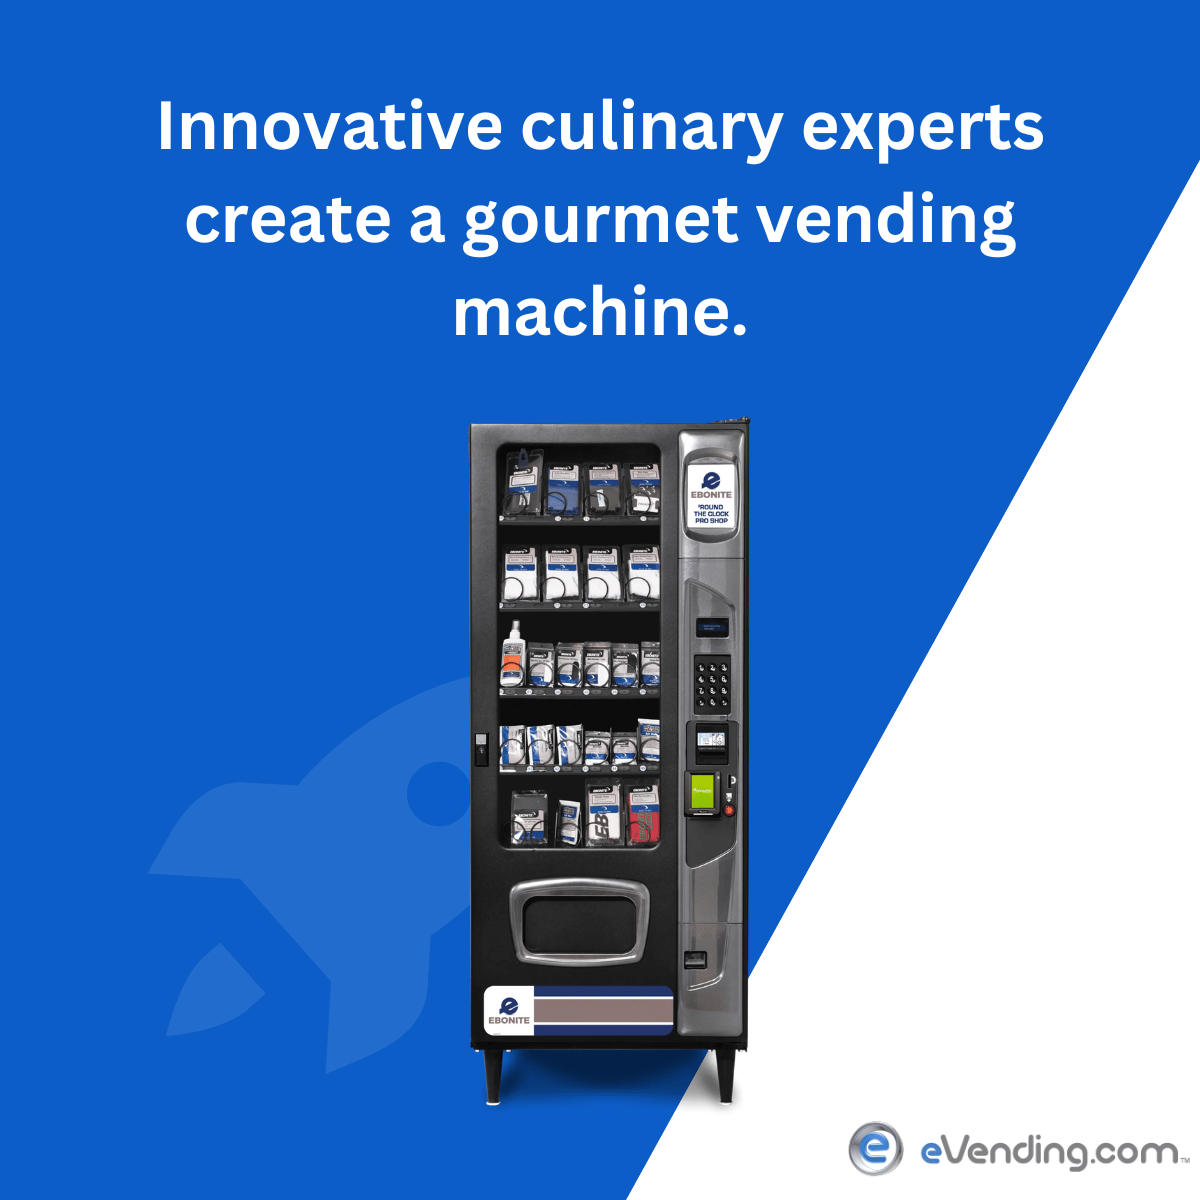 CREATIVE CHEFS COME UP WITH GOURMET VENDING MACHINE